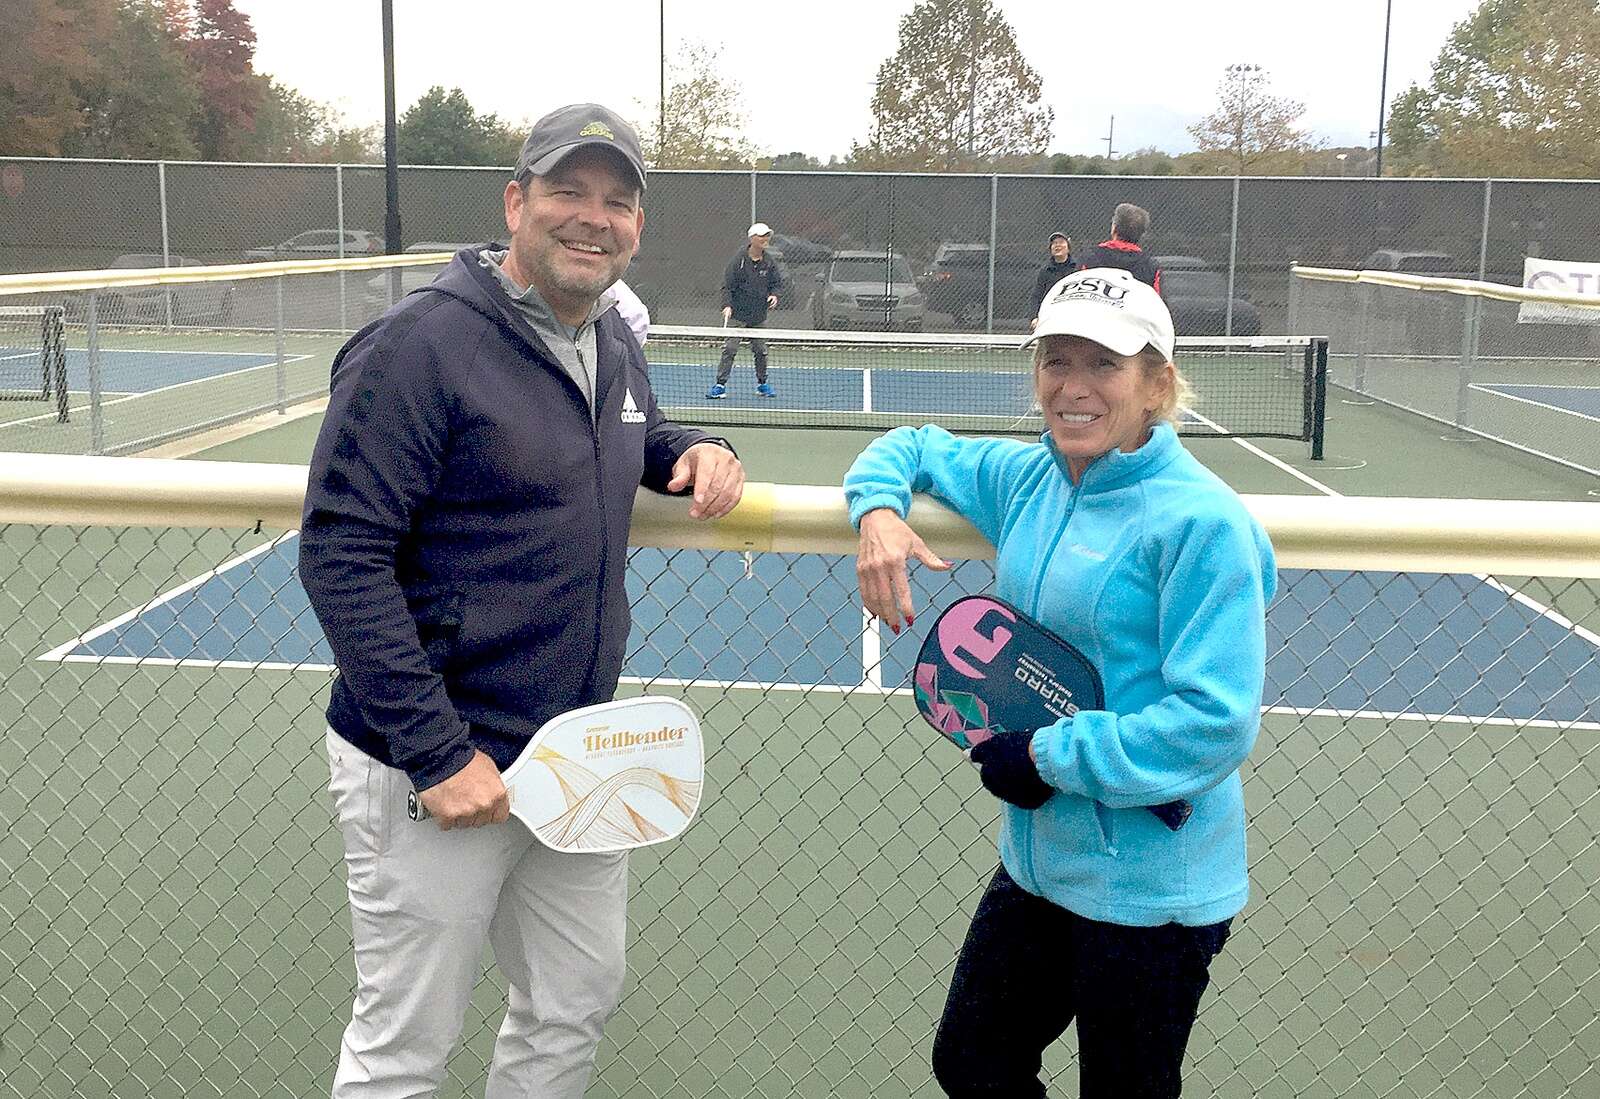 Barry Watkiss and Kathy Hensler take a break during a Pickleball lesson